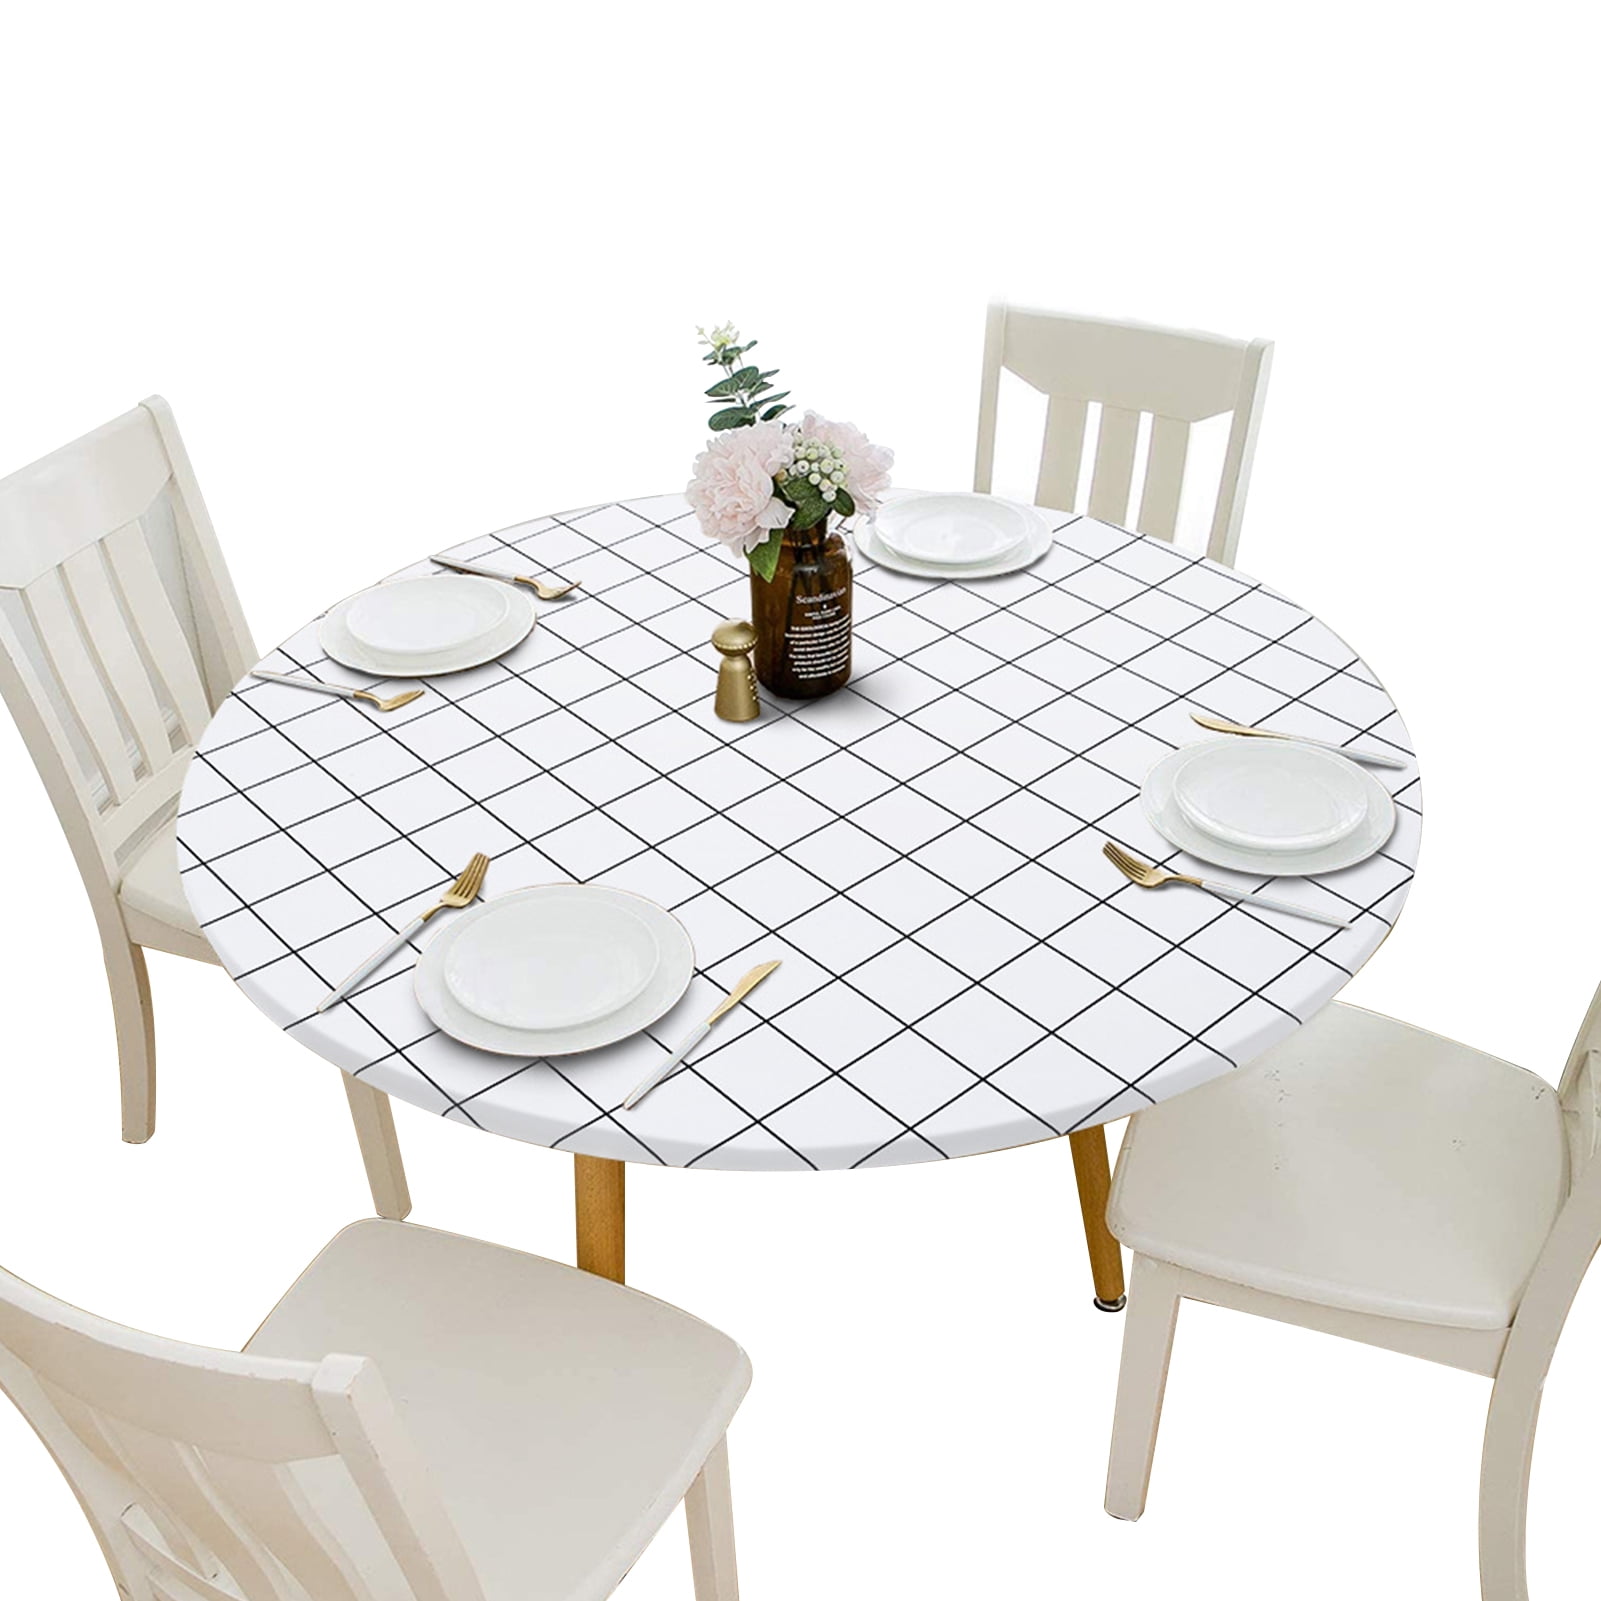 Cover Table Cloth With Elastic Band, Round Table Plastic Sheet